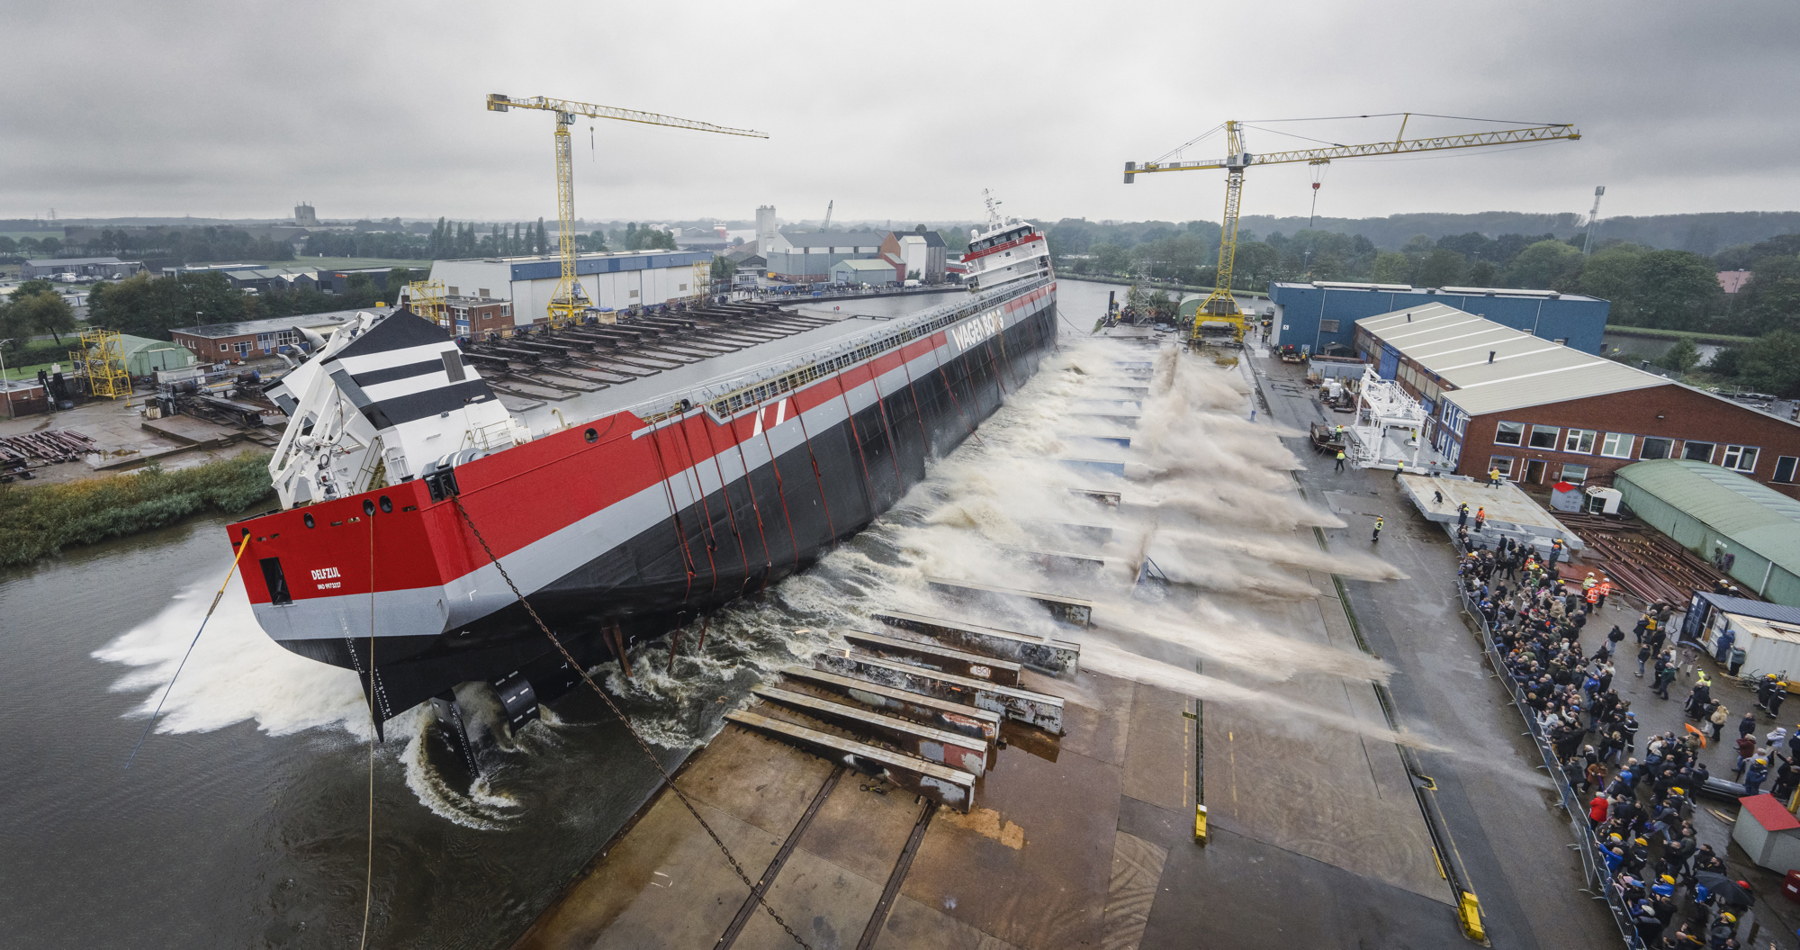 EasyMax 3 launched successfully at shipyard Niestern Sander